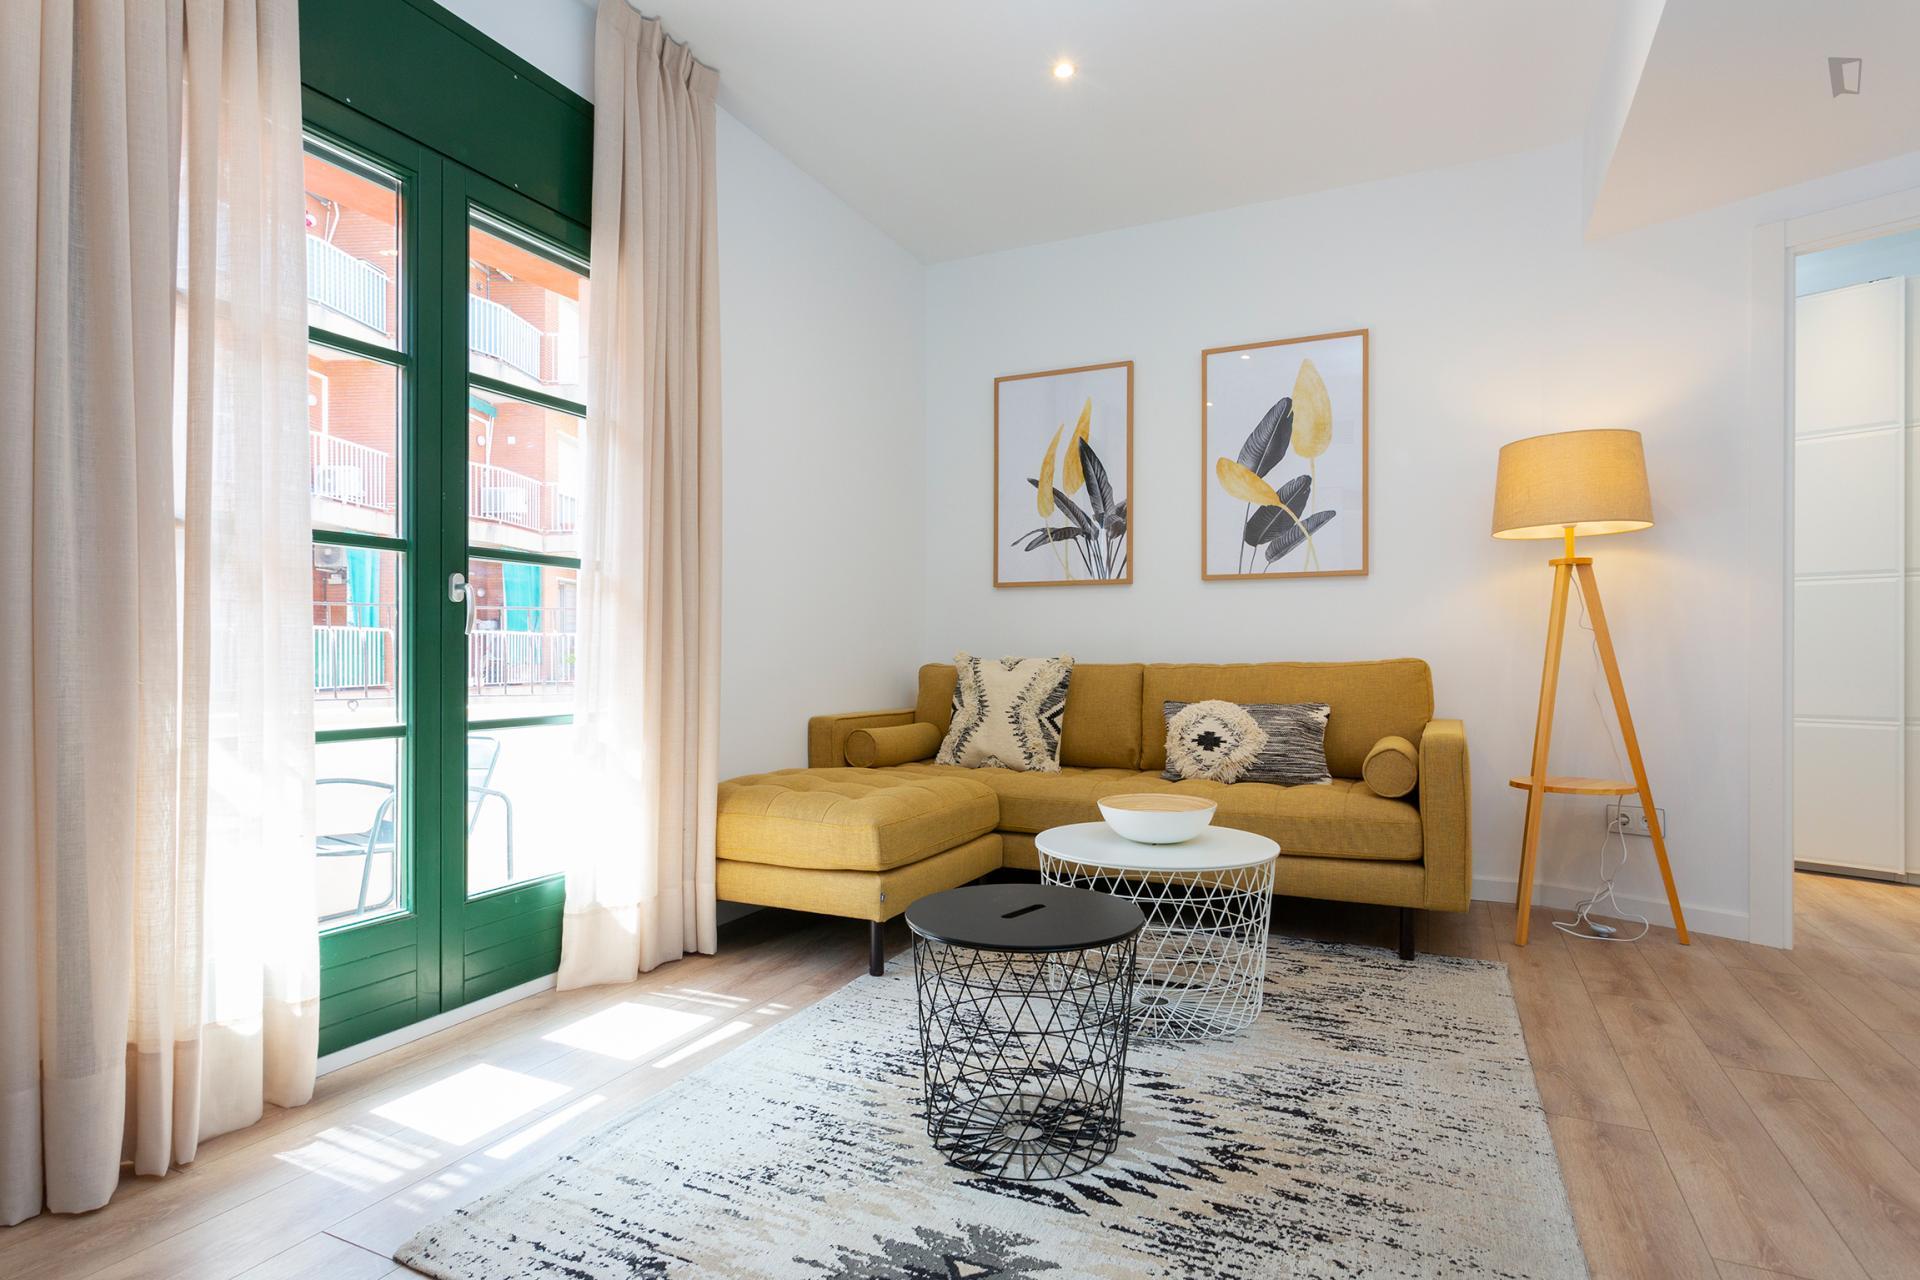 Portugalete 3 - Furnished flat for expats in Barcelona